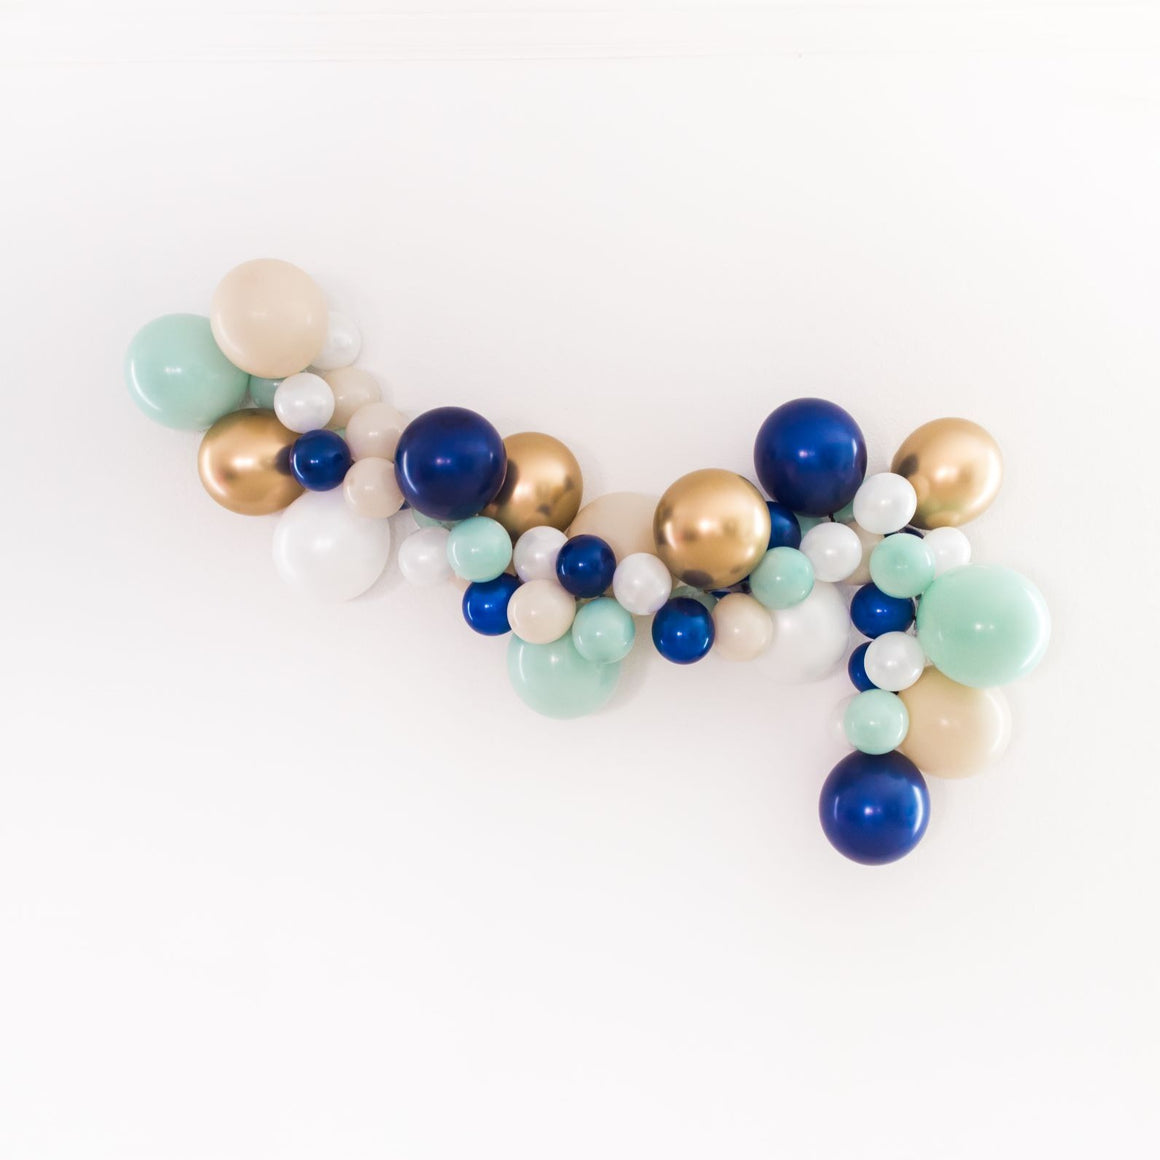 A nautical themed balloon garland is draped across a white wall. The garland consists of various 5 inch and 11 inch balloons in the colors of pearl white, tan, jade, navy, and chrome gold.